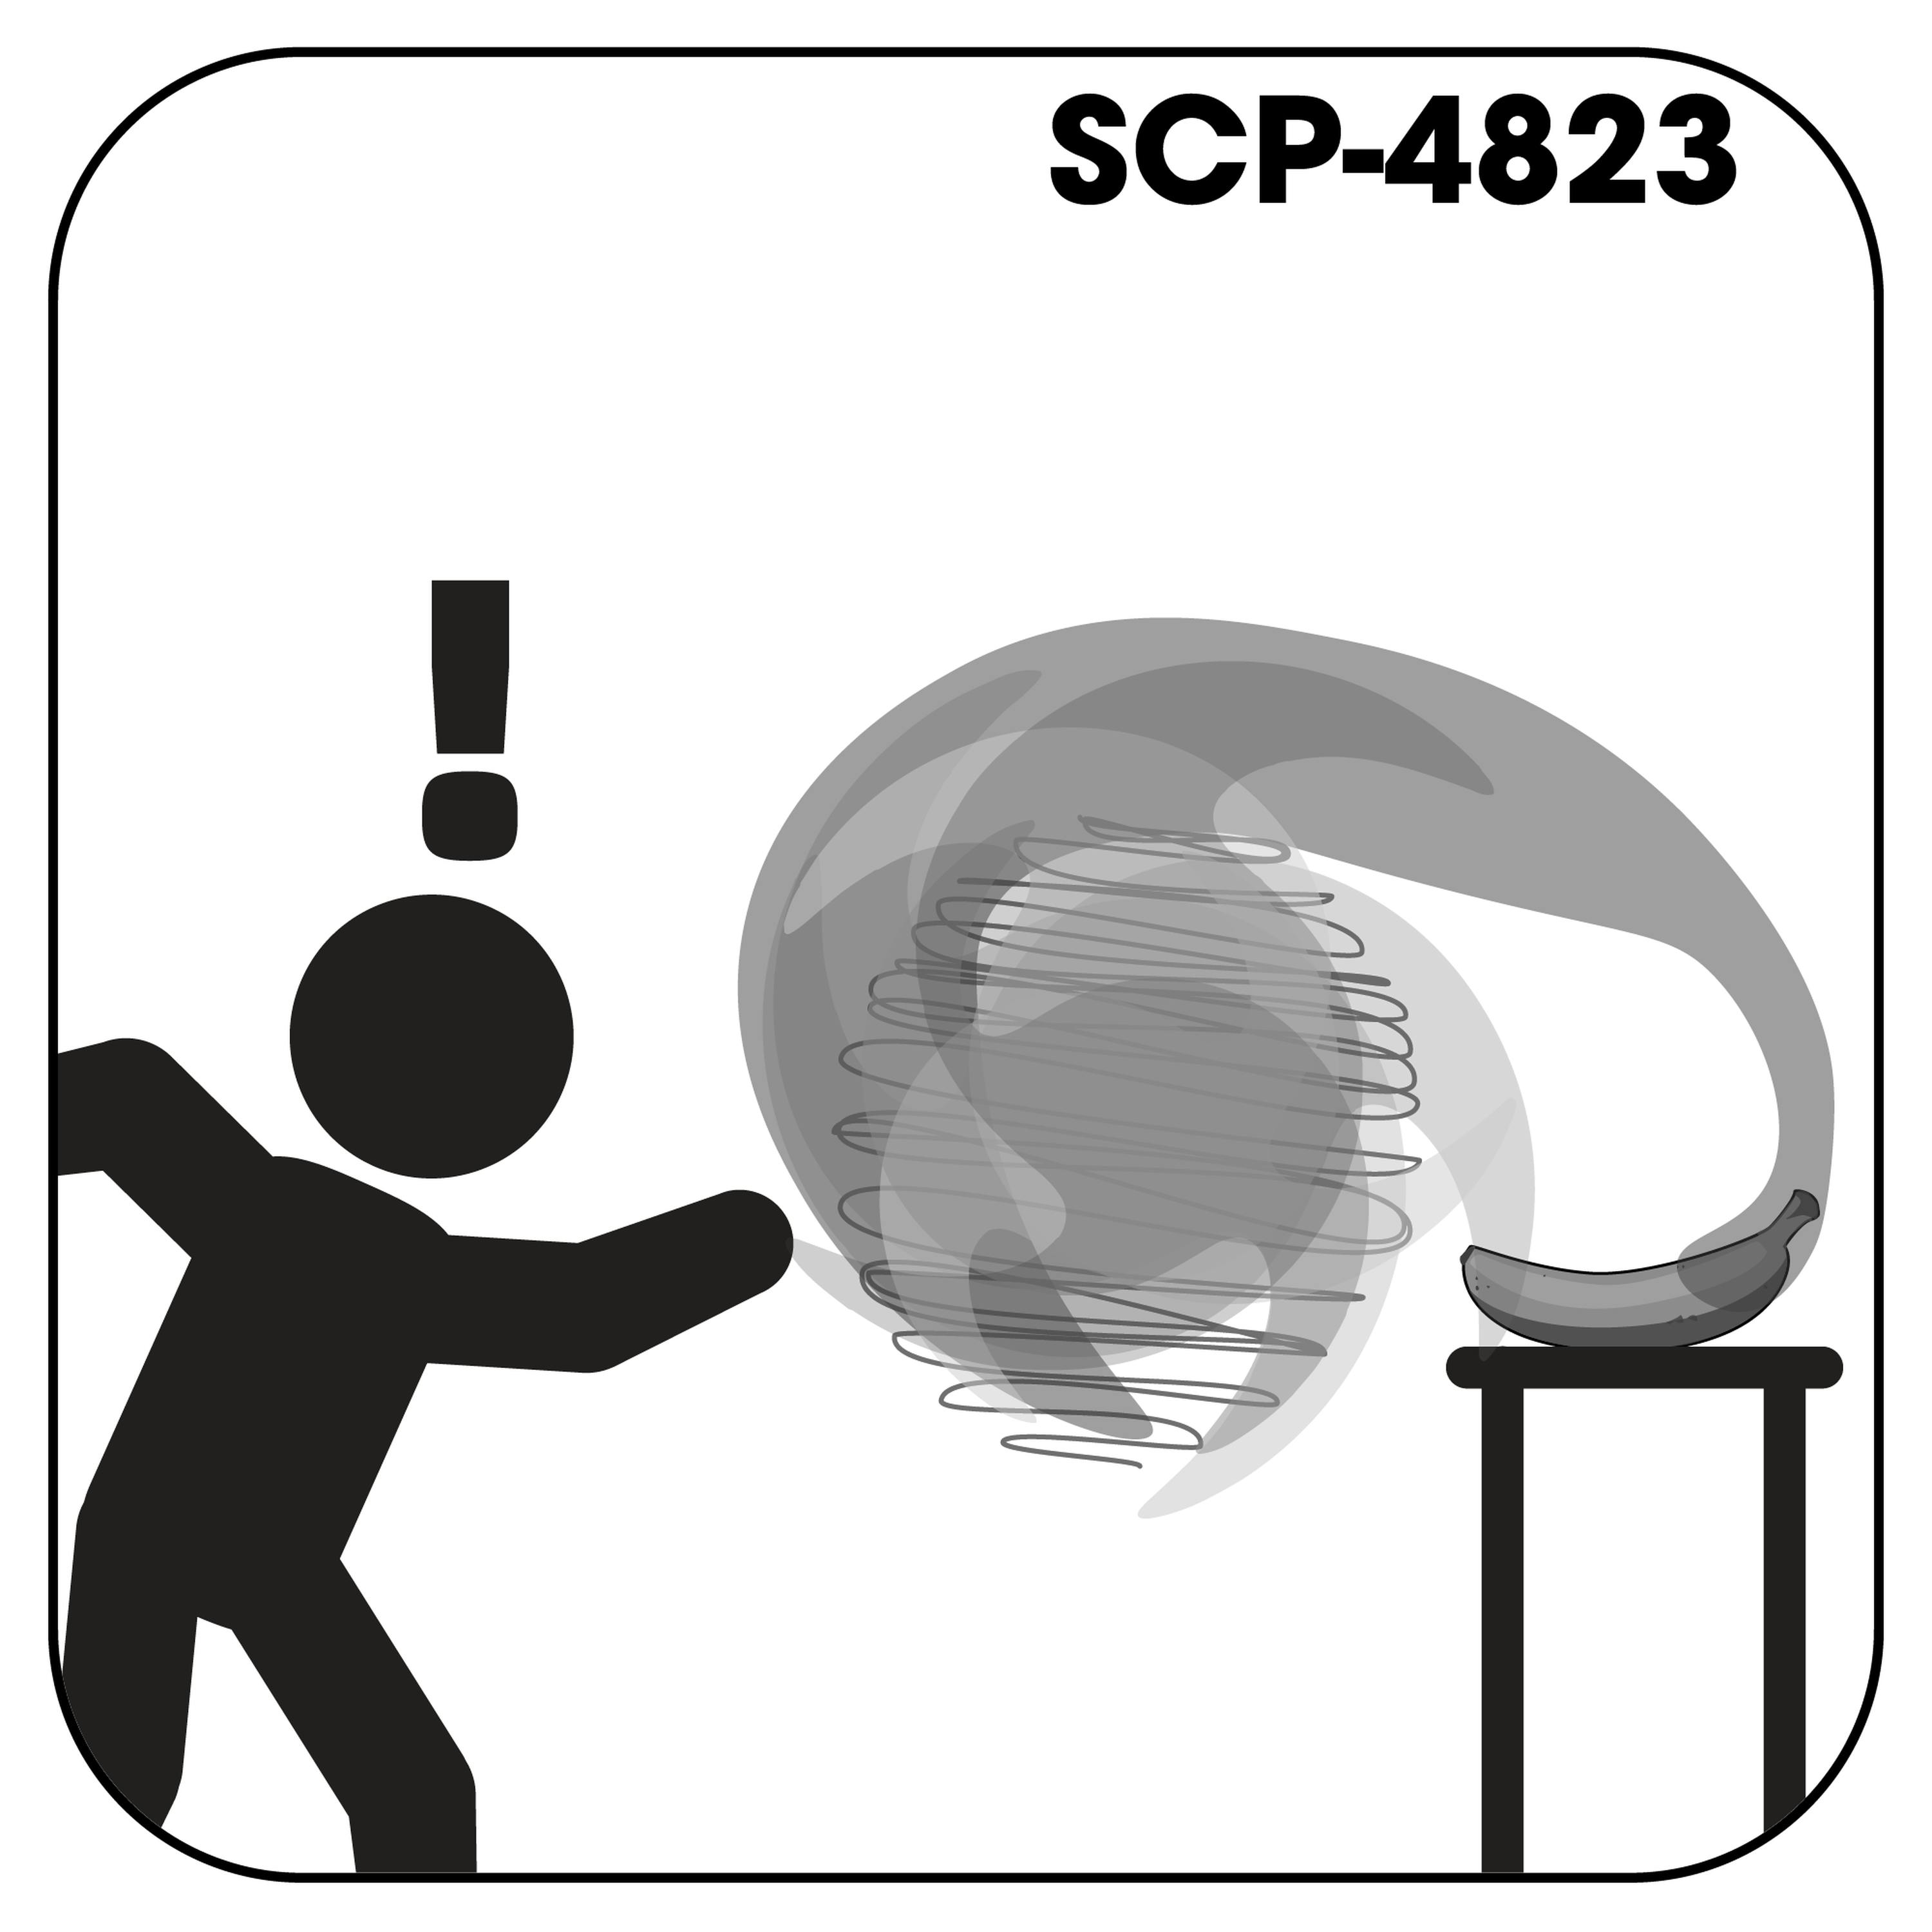 SCP-4823: 